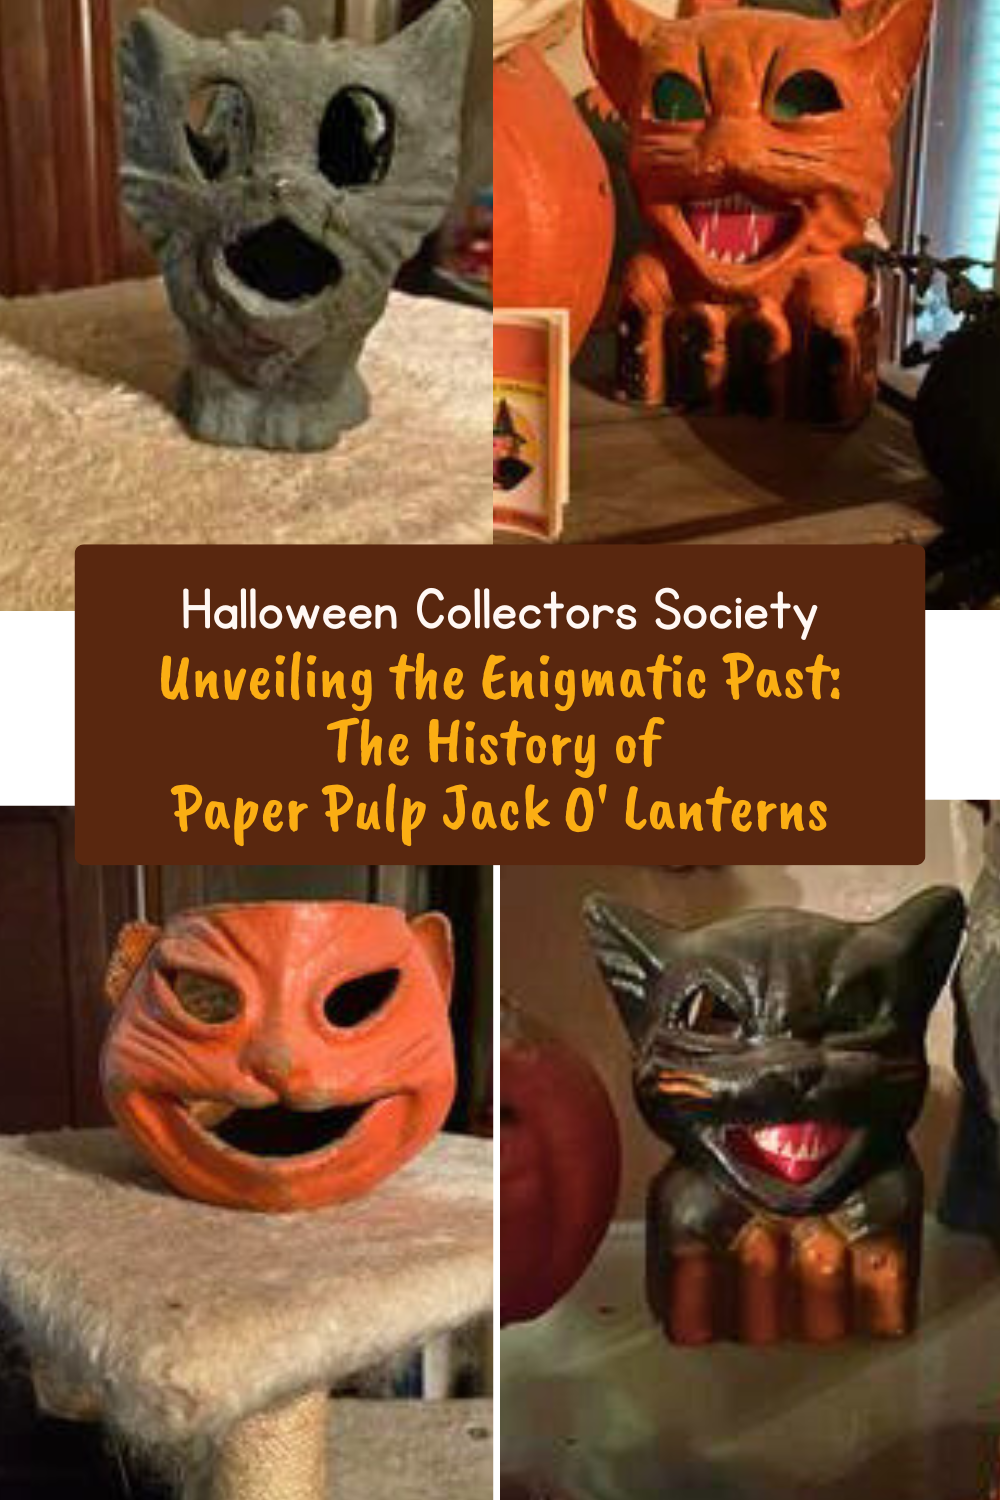 A variety of black and orange paper pulp jack o'lanterns and cats.